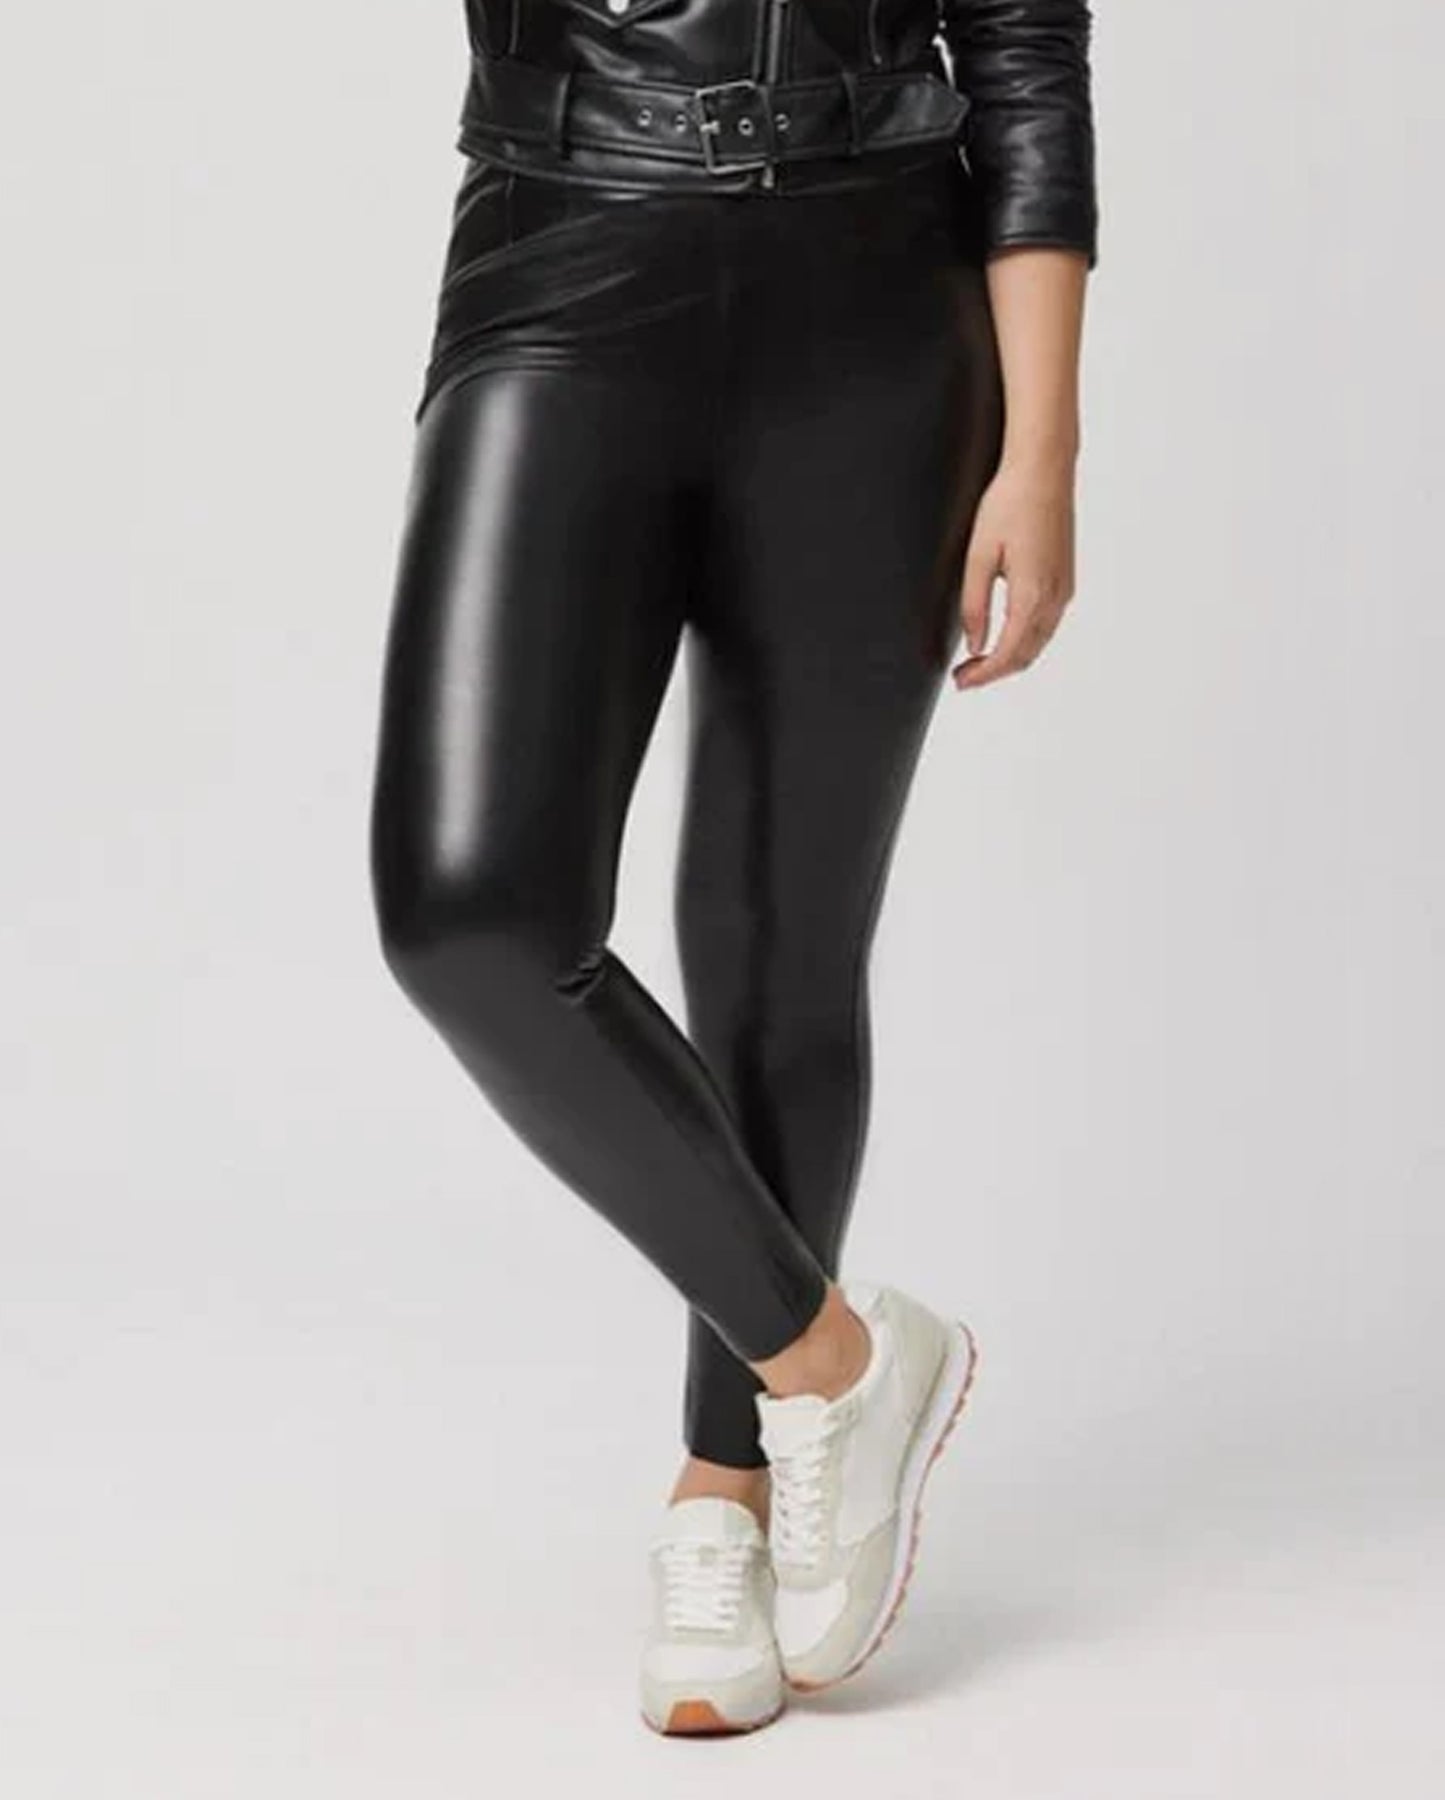 Ysabel Mora 70164 Faux Leather Leggings - High rise black faux leather fleece lined trouser leggings with invisible side zip, darts at the front and back to ensure a snug fit.